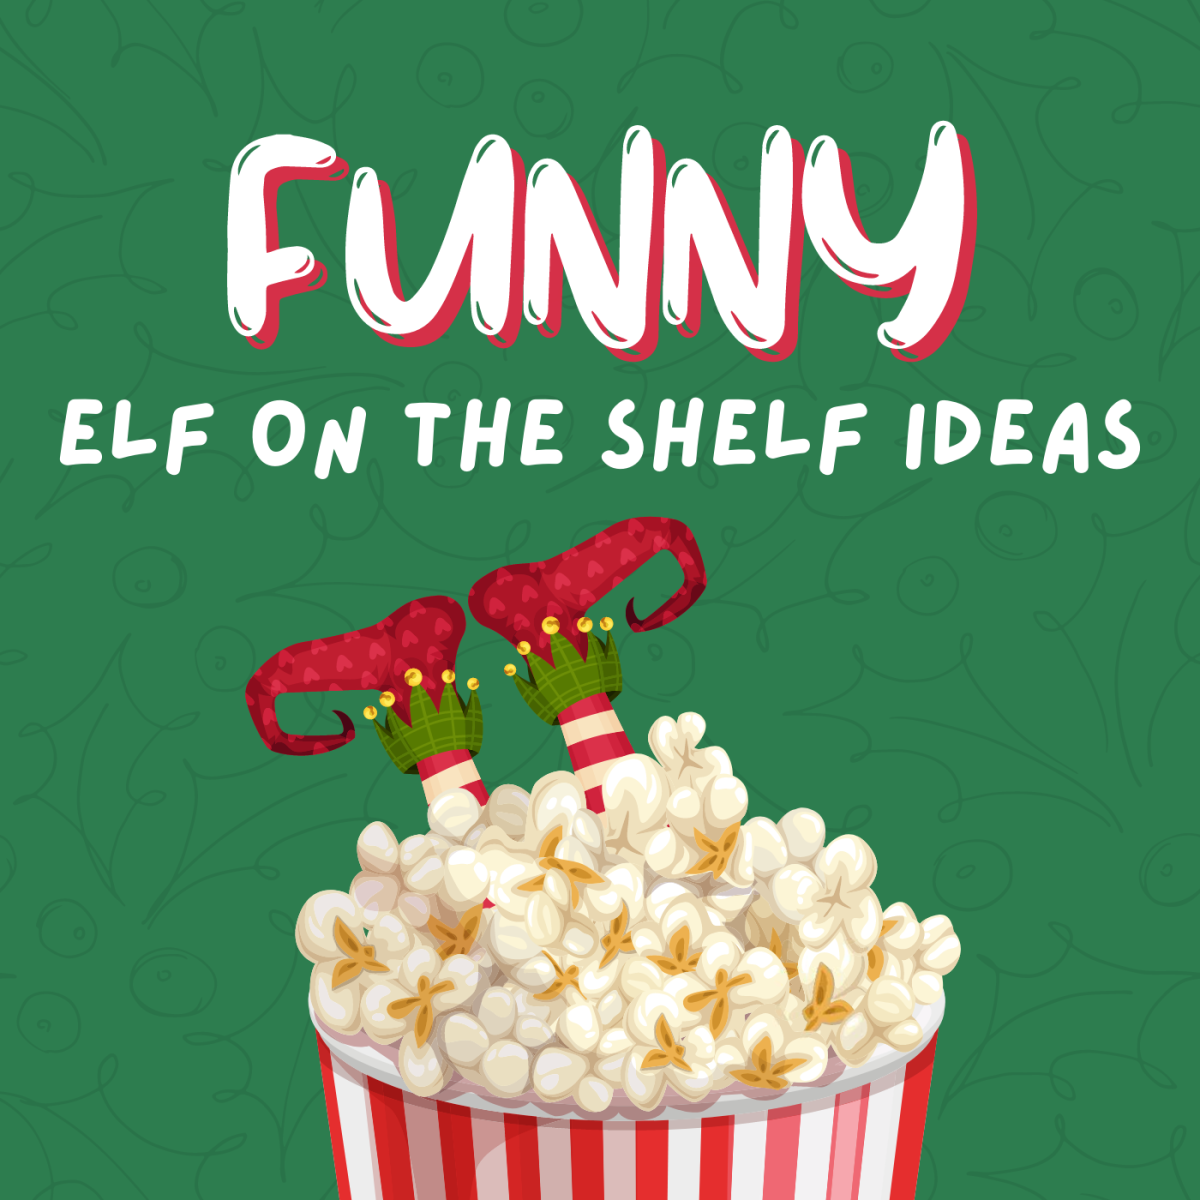 50+ Hilarious Elf on the Shelf Ideas for Kids That Are So Fun